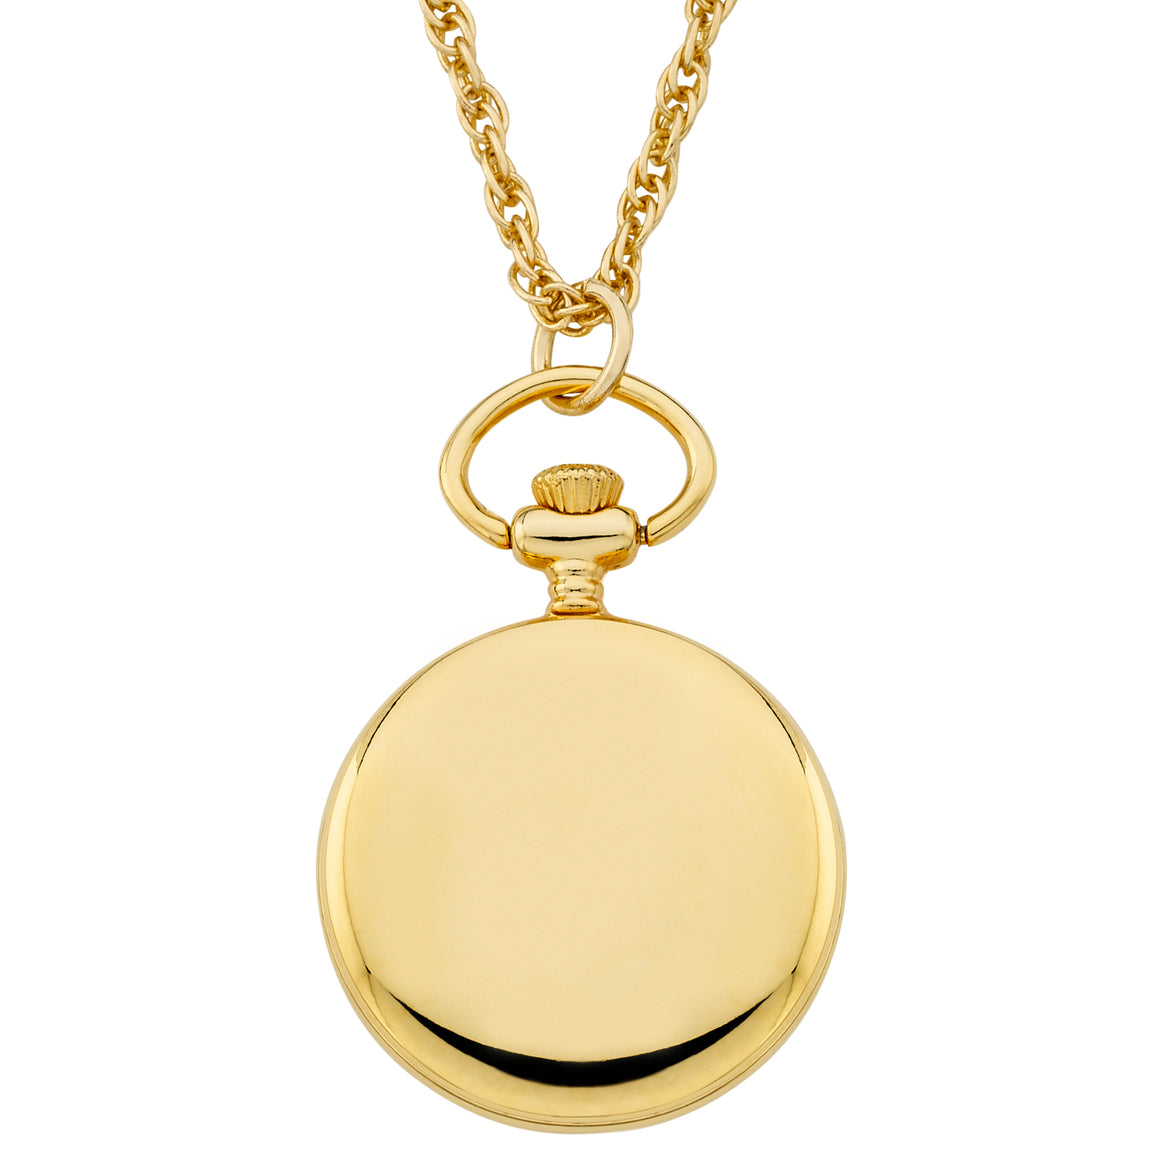 Gotham Women's Gold-Tone Open Face Pendant Watch with Chain # GWC14138GR